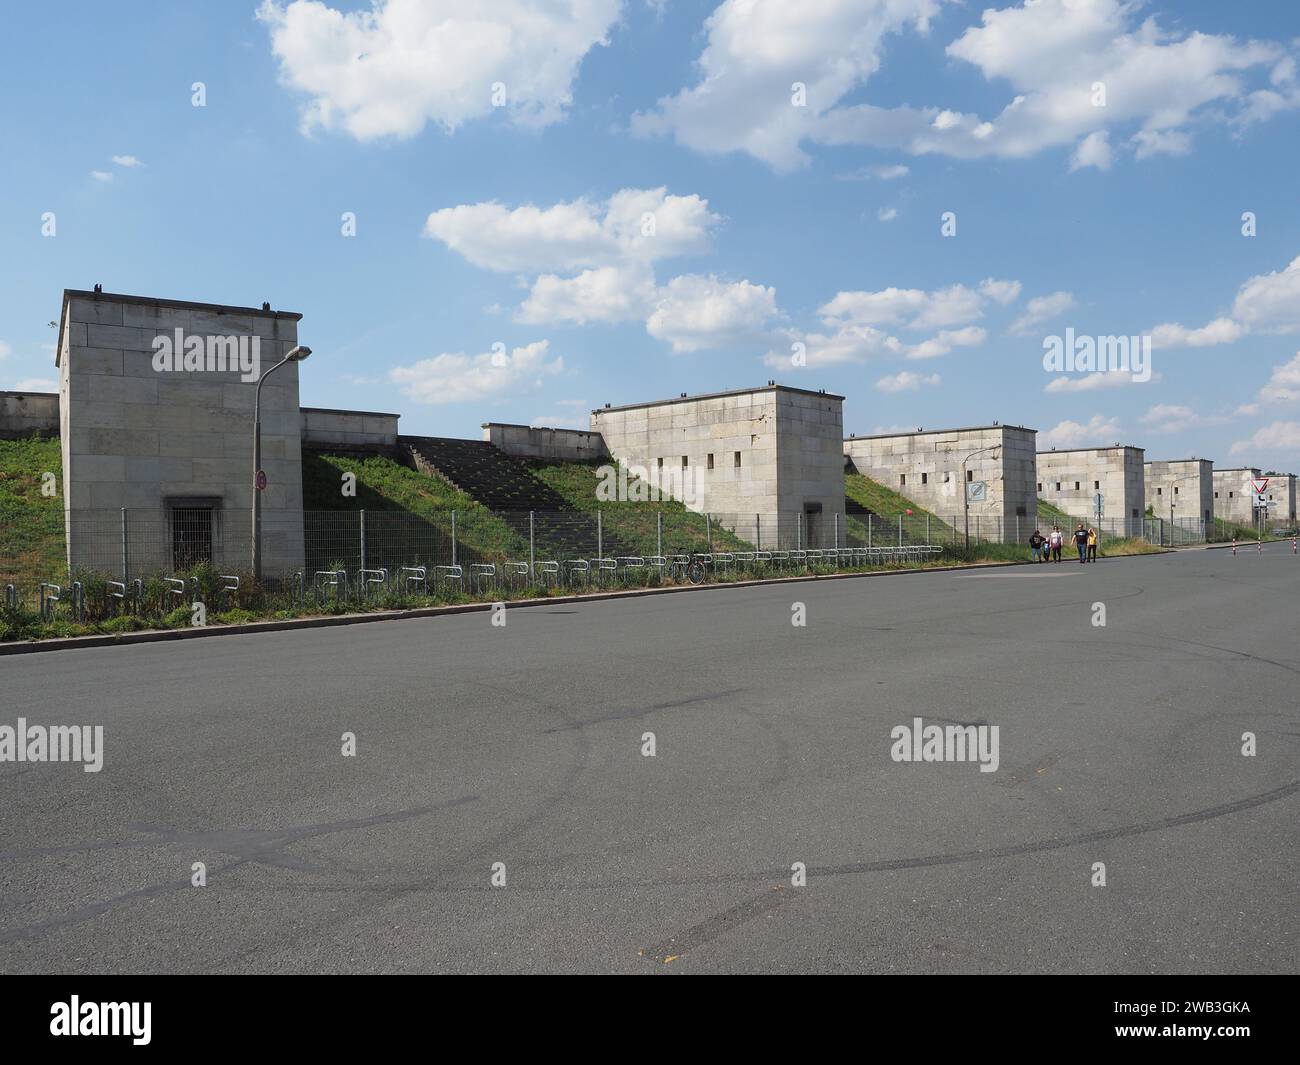 NUERNBERG, GERMANY - CIRCA JUNE 2022: Zeppelinfeld Translation Zeppelin Field Designed By Architect Albert Speer As Part Of The Nazi Party Rally Groun Stock Photo